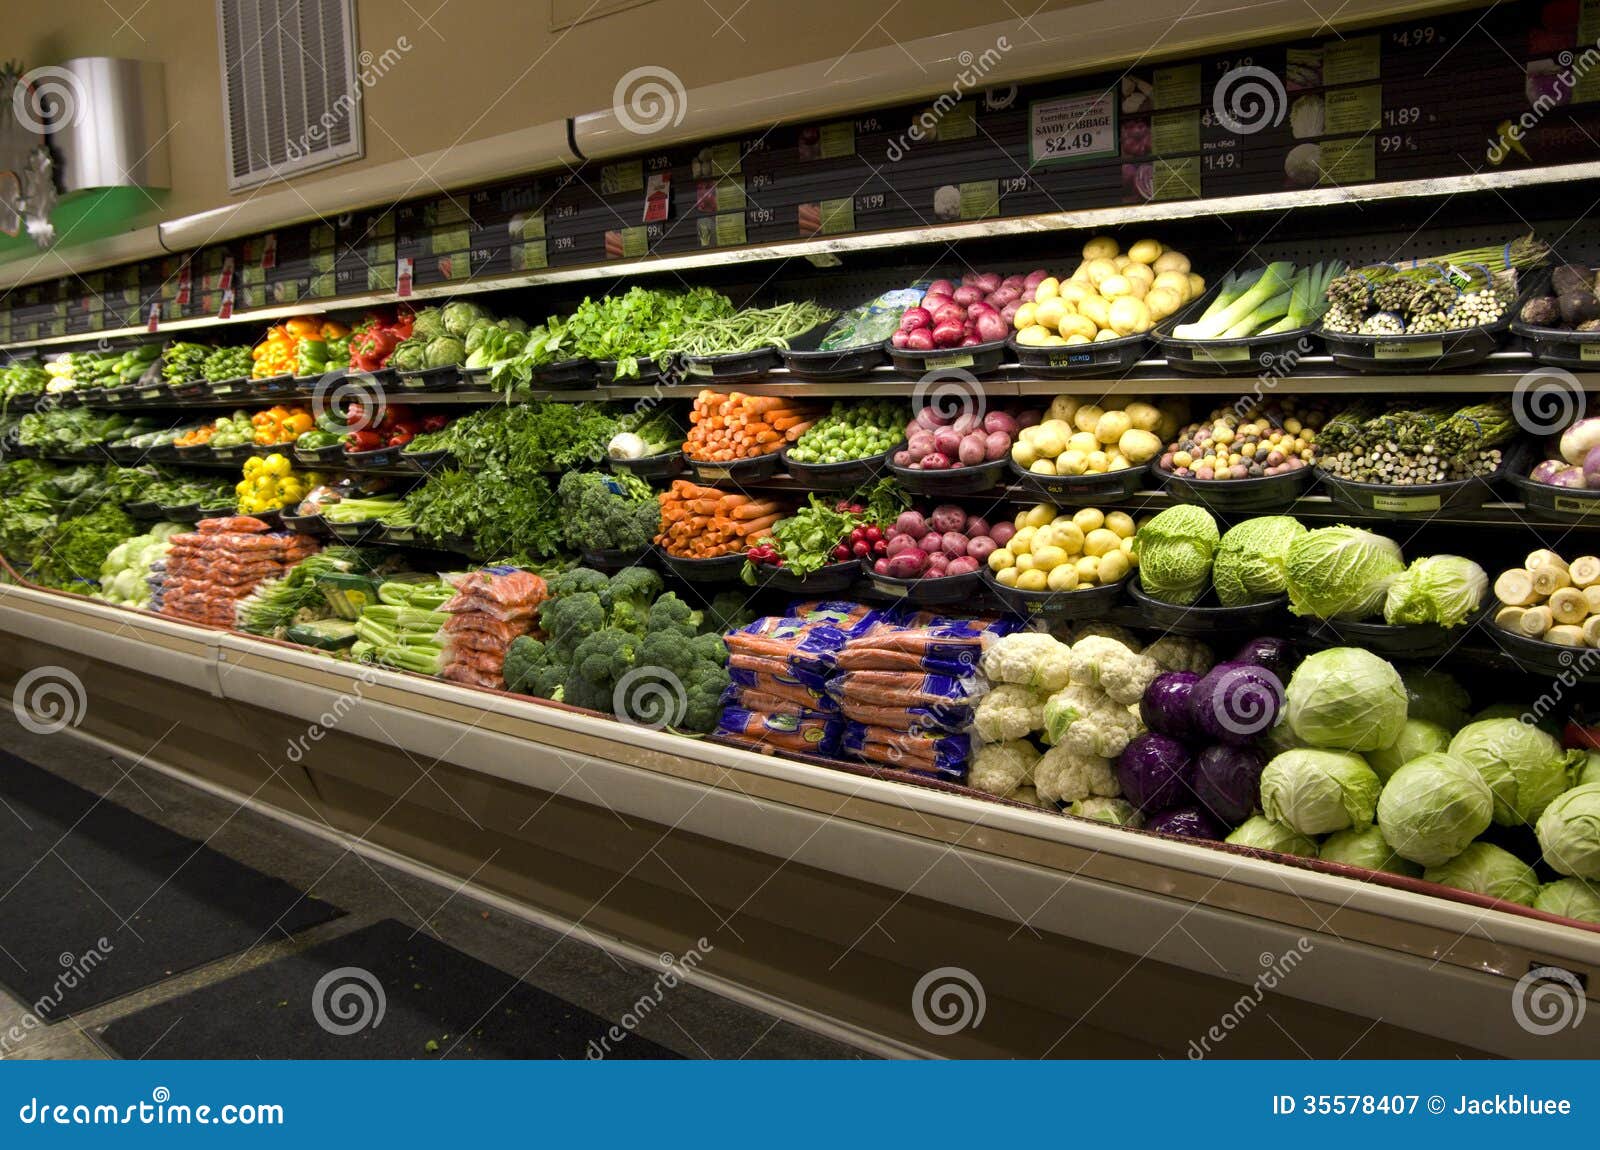 healthy vegetables grocery store